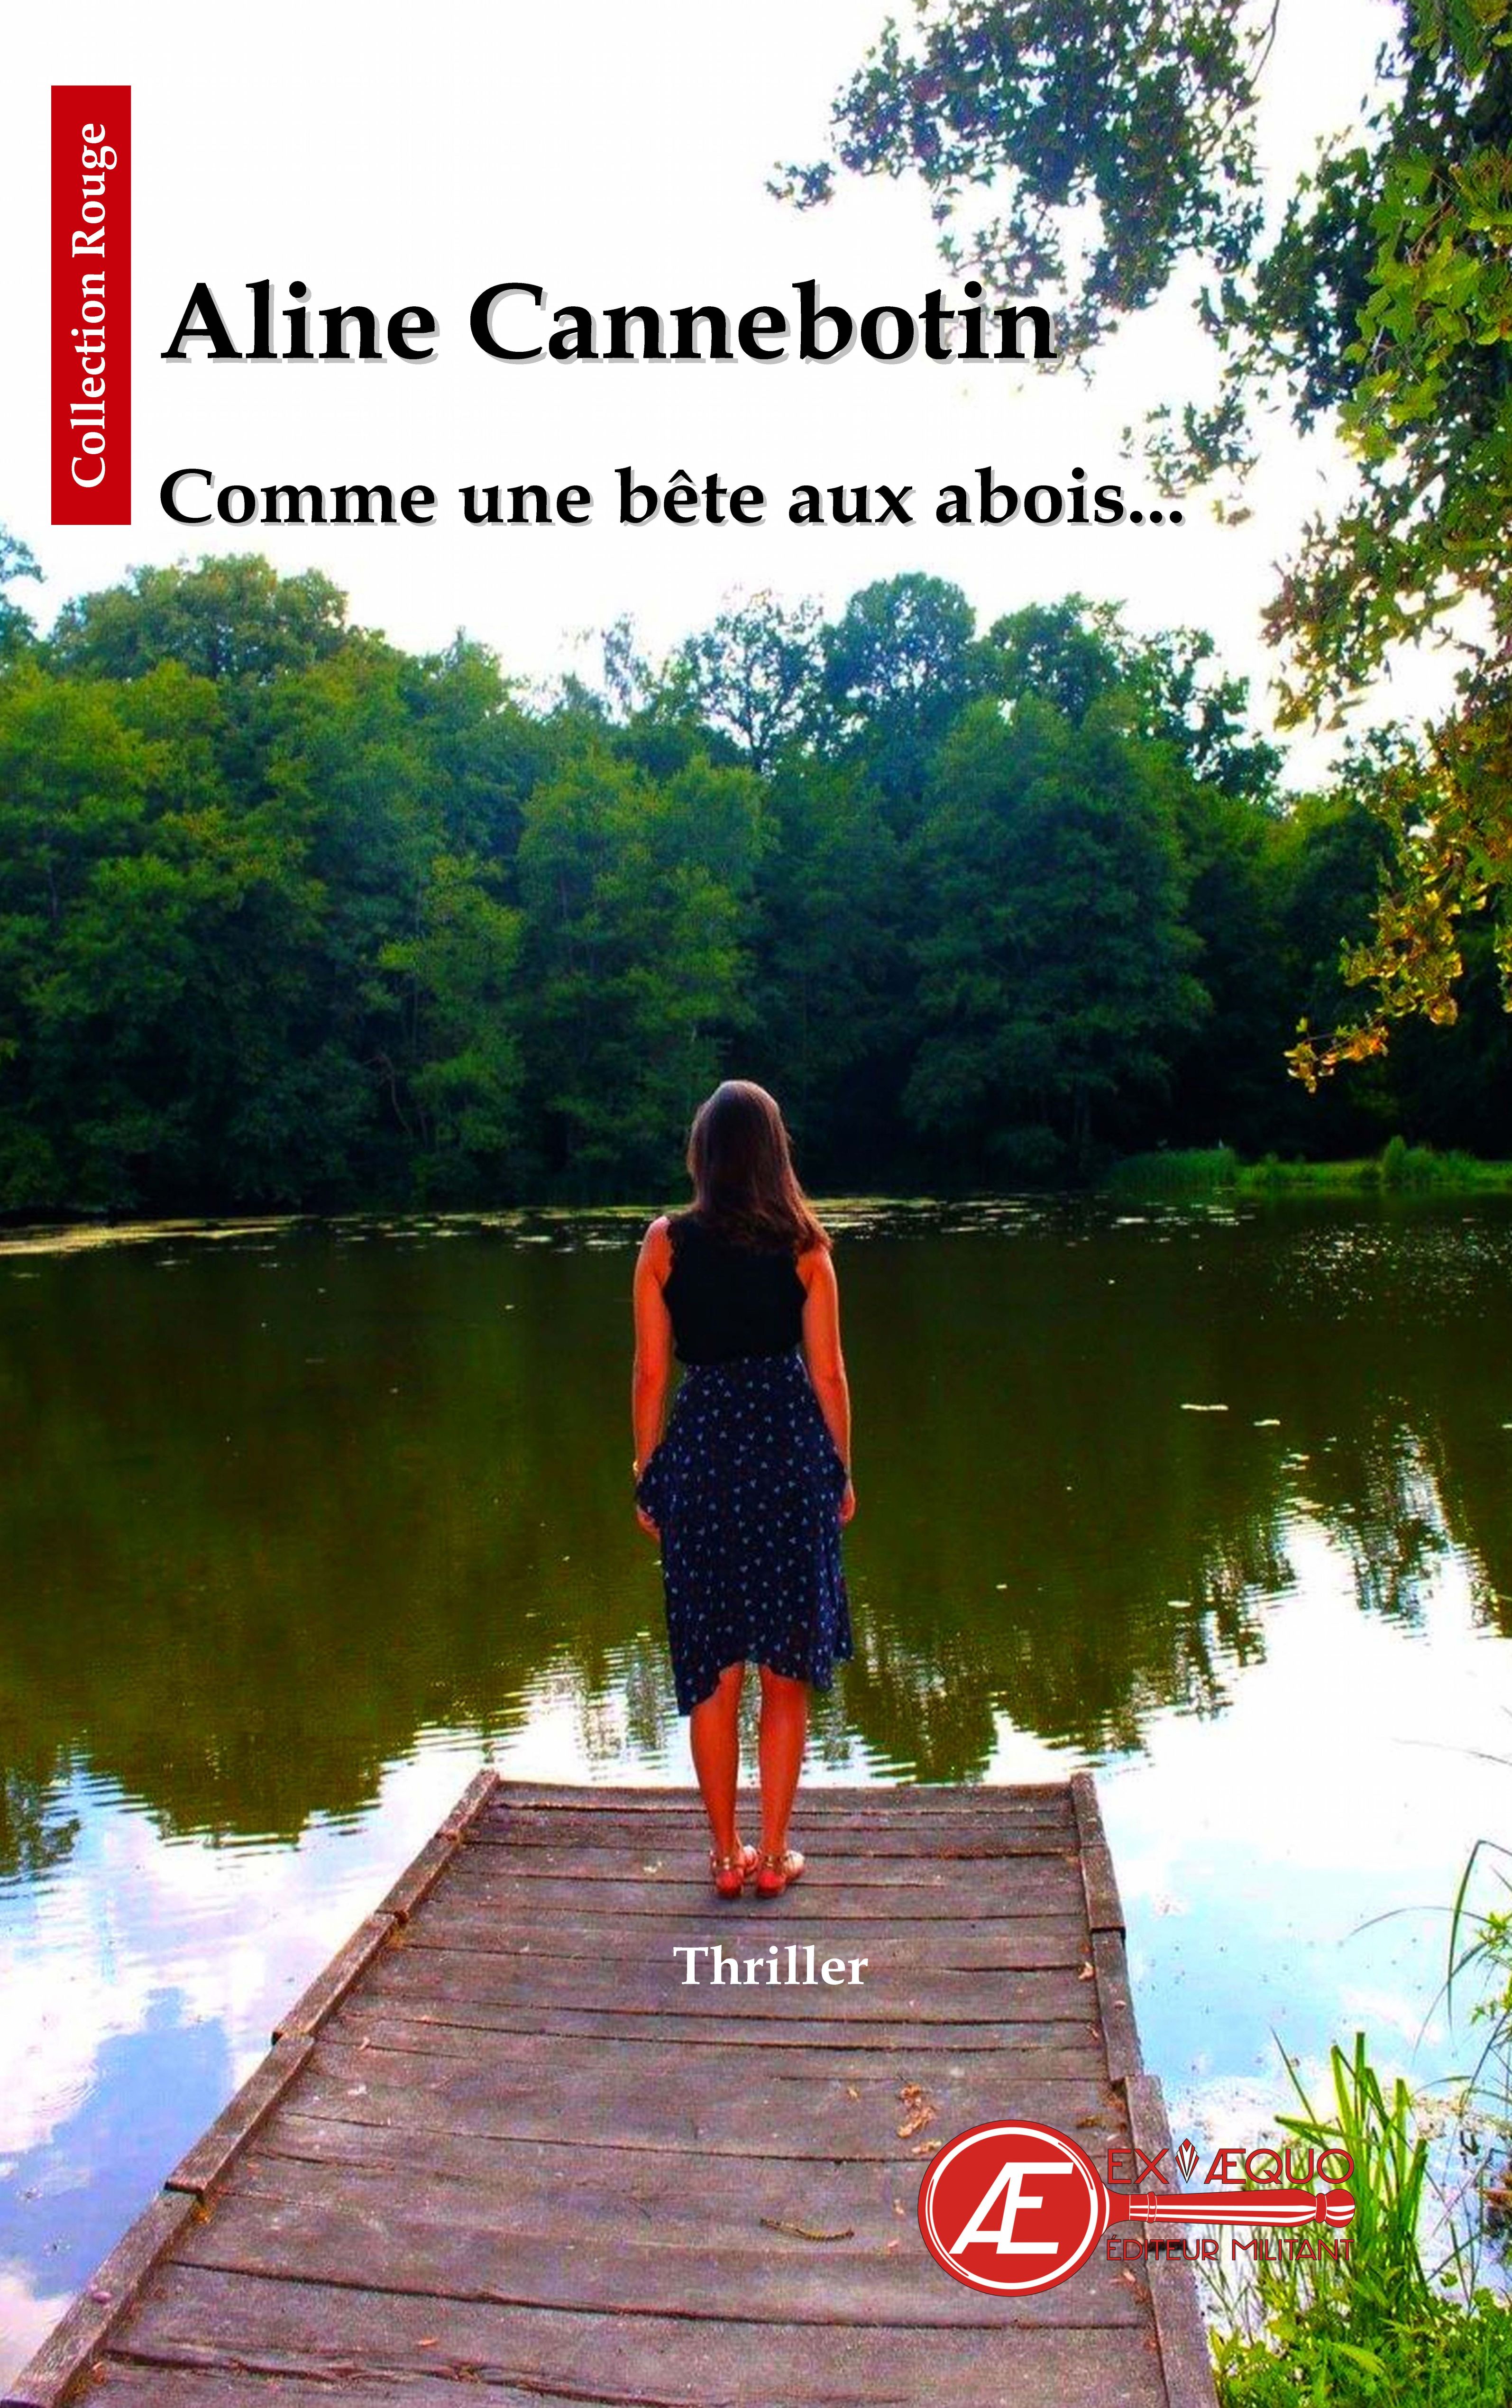 You are currently viewing Comme une bête aux abois, d’Aline Cannebotin